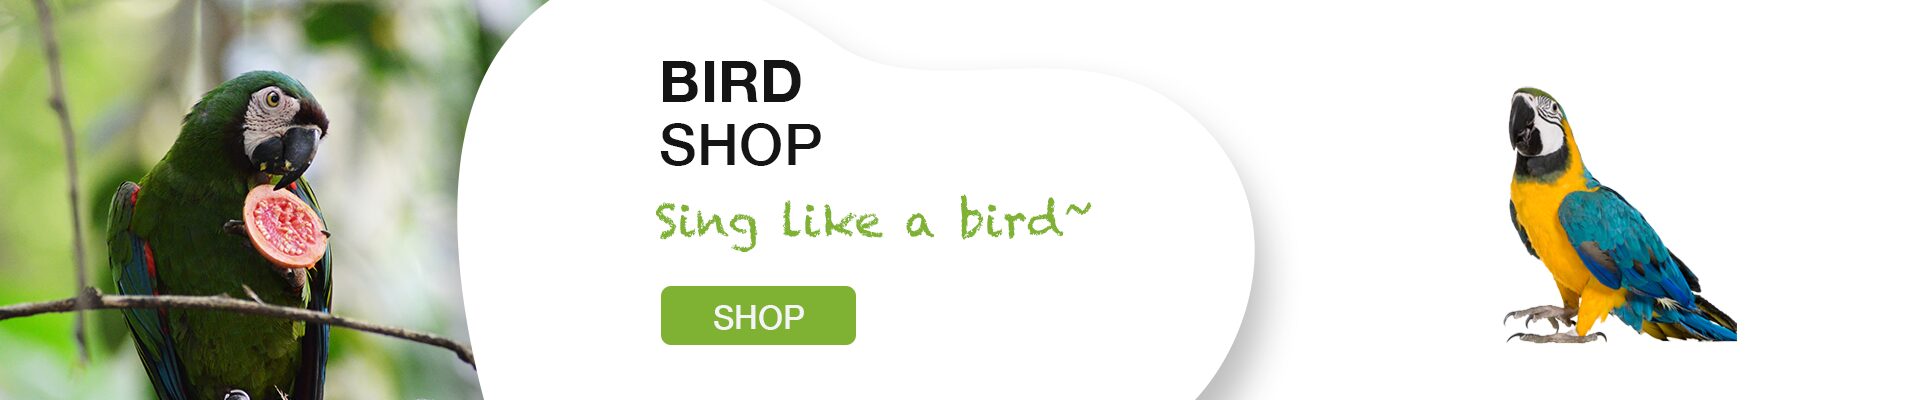 Shop for Bird Product